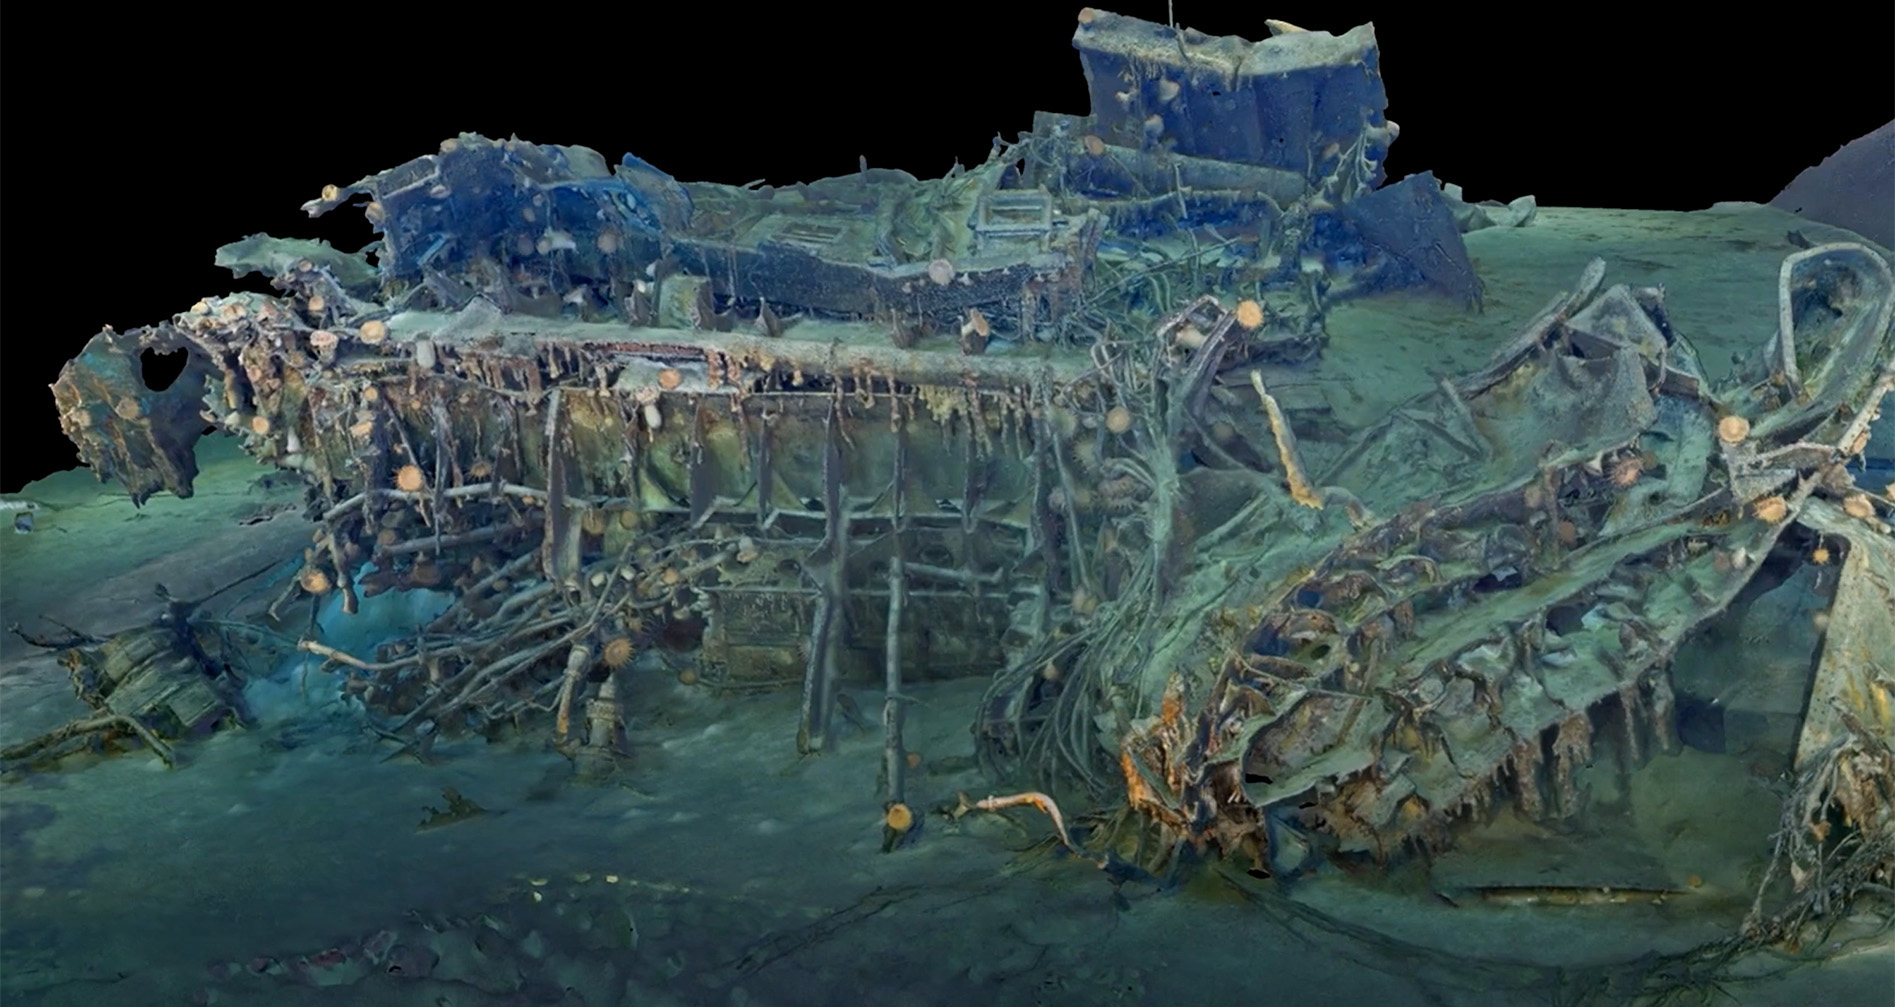 Wreckage from famous warships explored in 3D on anniversary of sinking